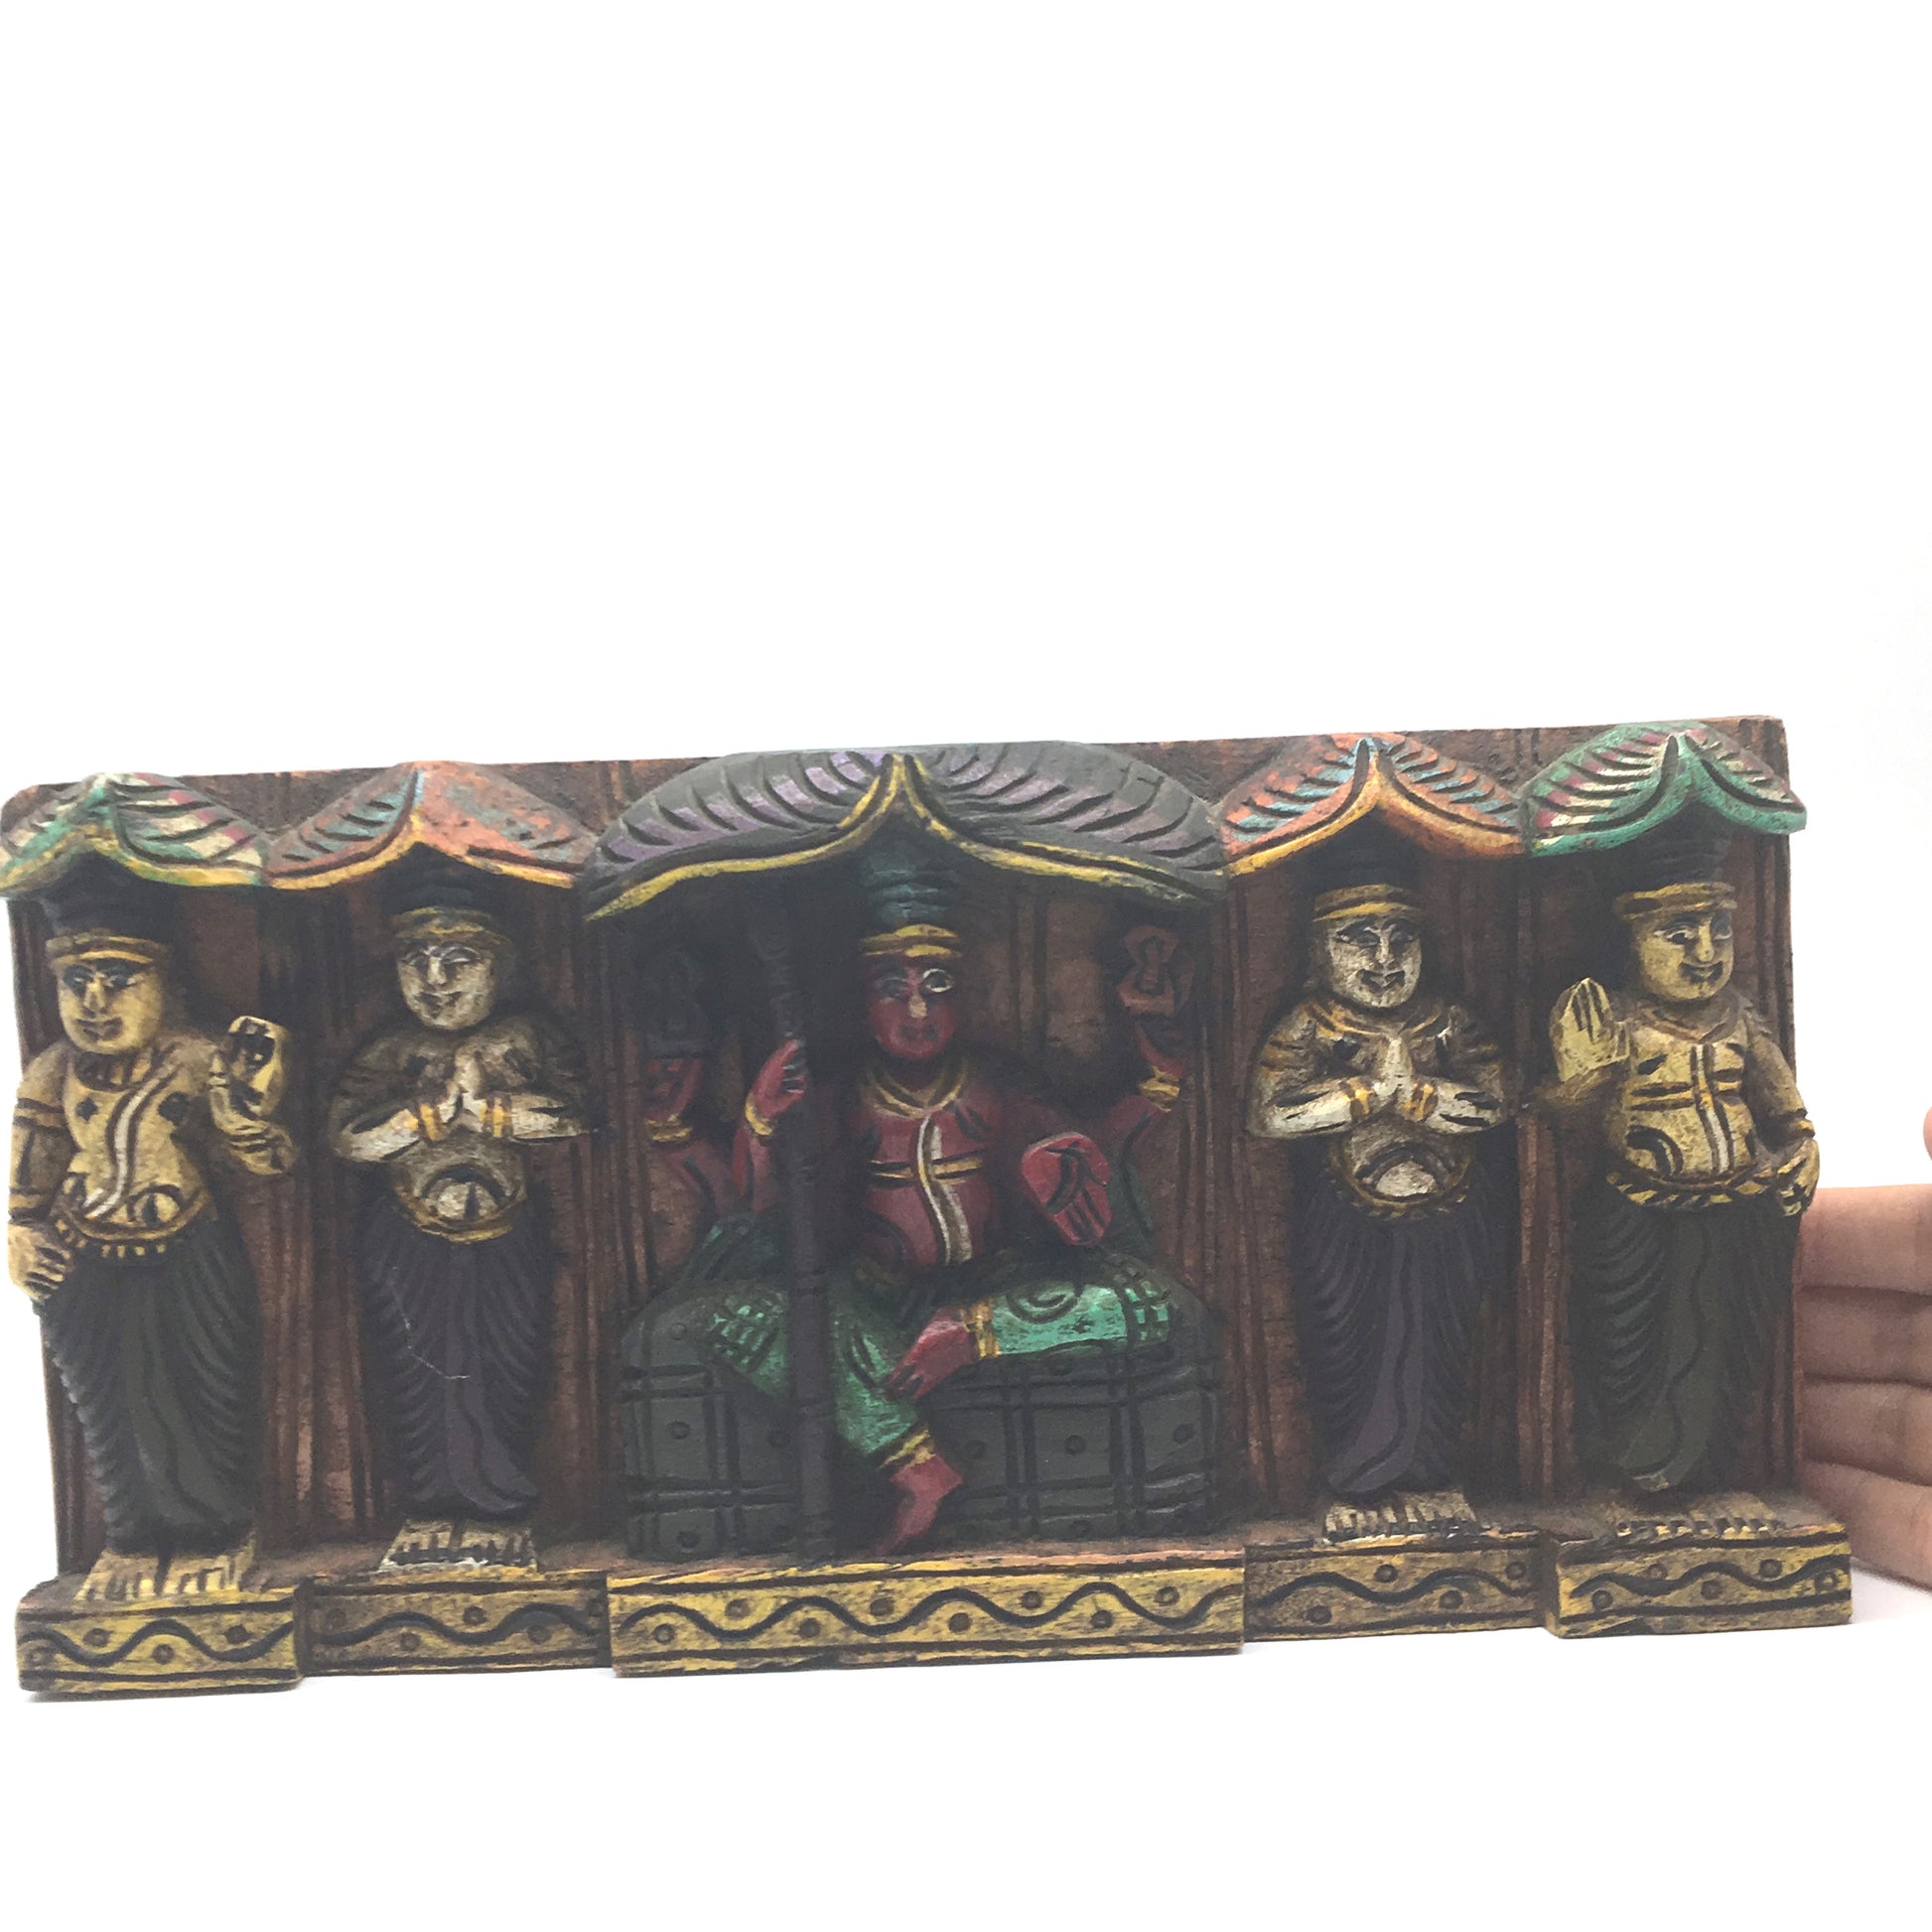 India Wood Carving Colorful Decorative Wooden Wall Hanging Panel Plaque - Montecinos Ethnic